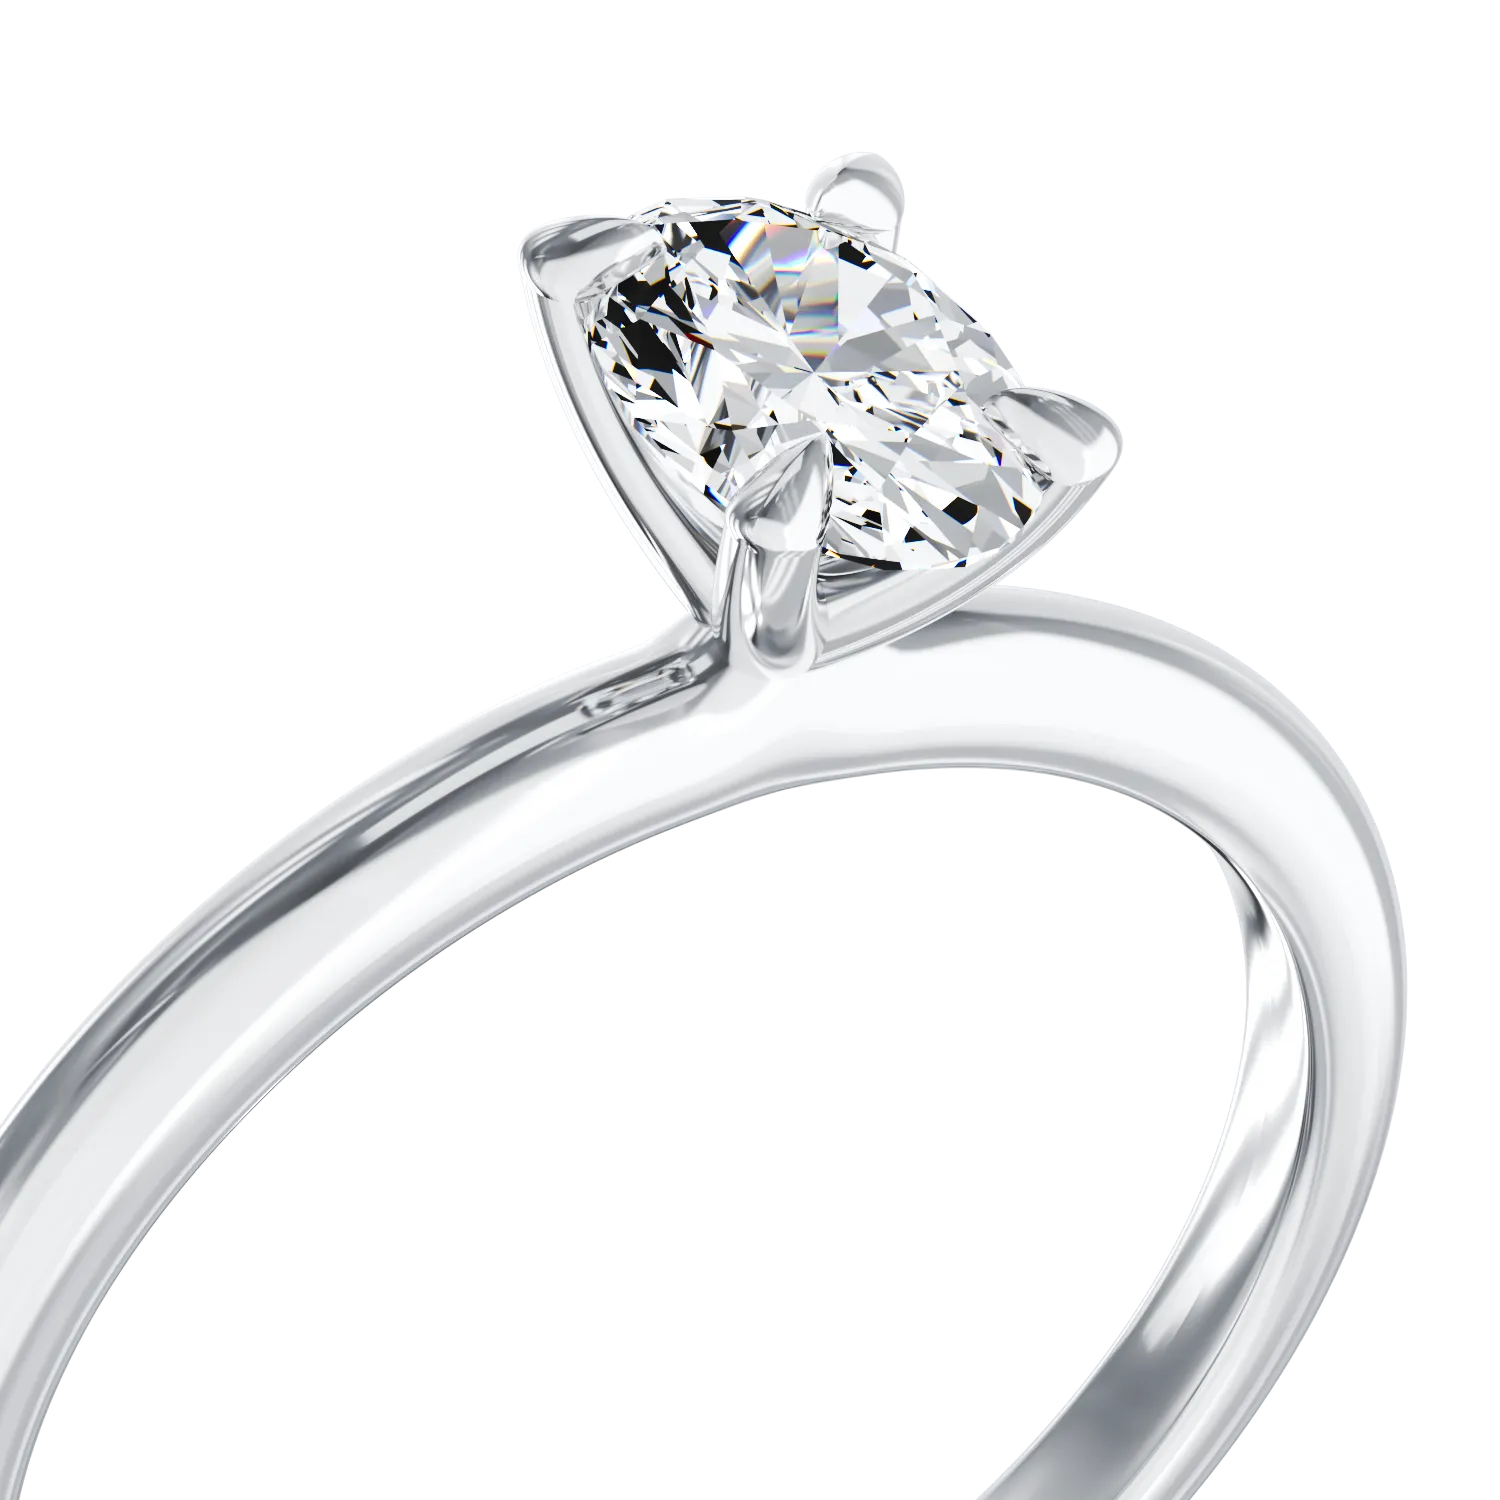 18K white gold engagement ring with a 0.3ct solitaire diamond